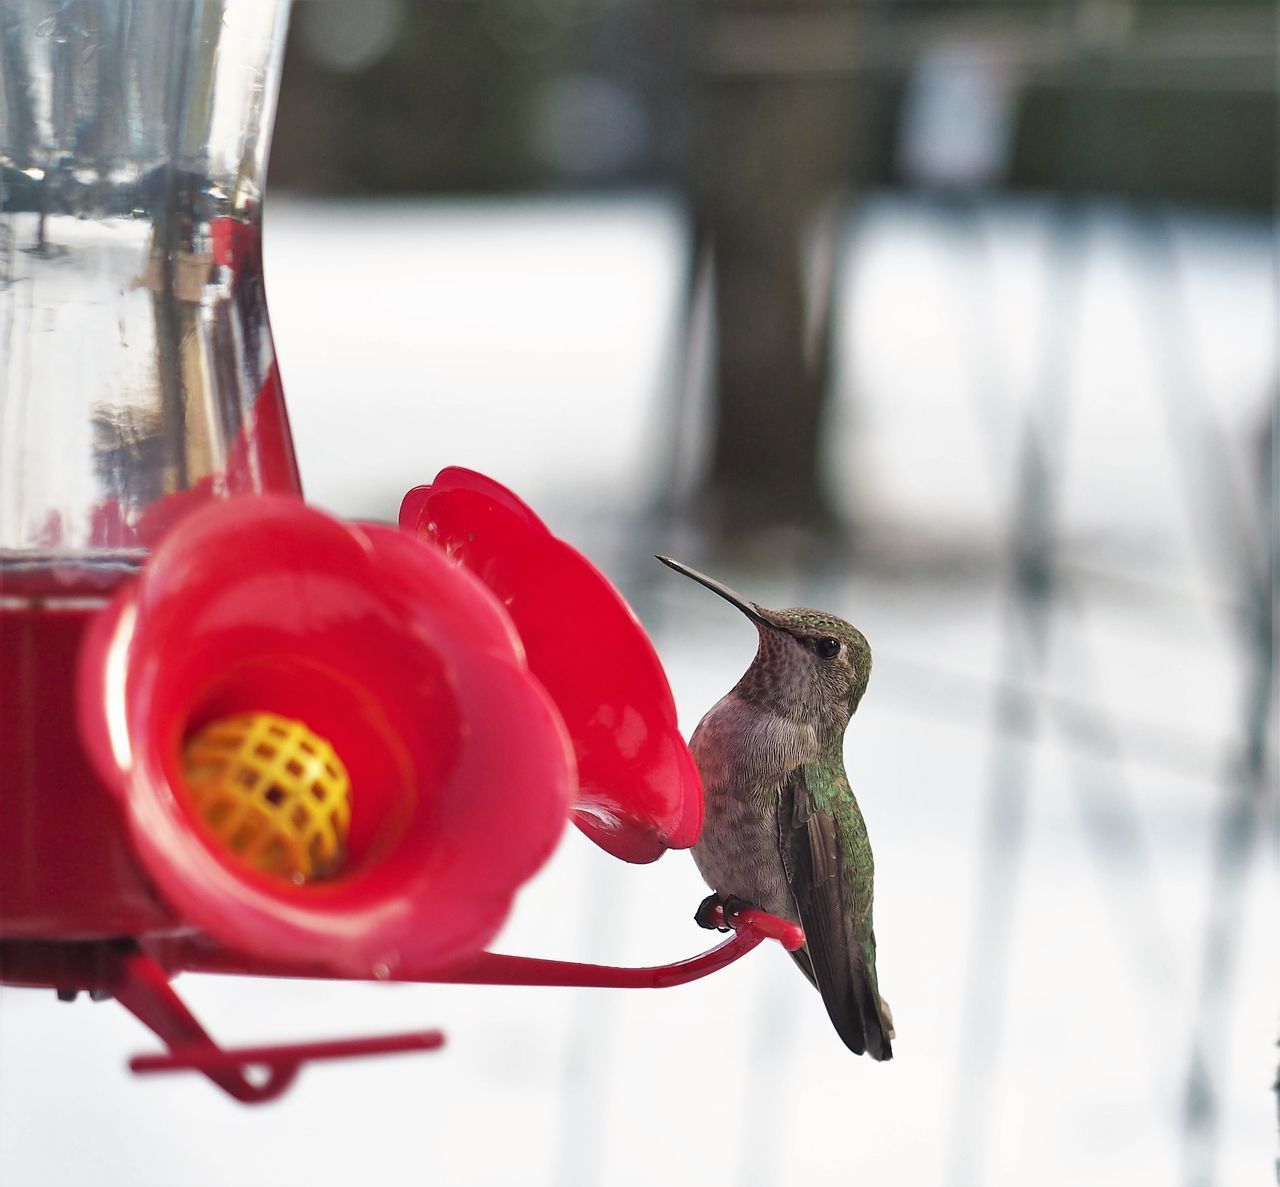 CLOSE-UP OF BIRD WITH RED FEEDER